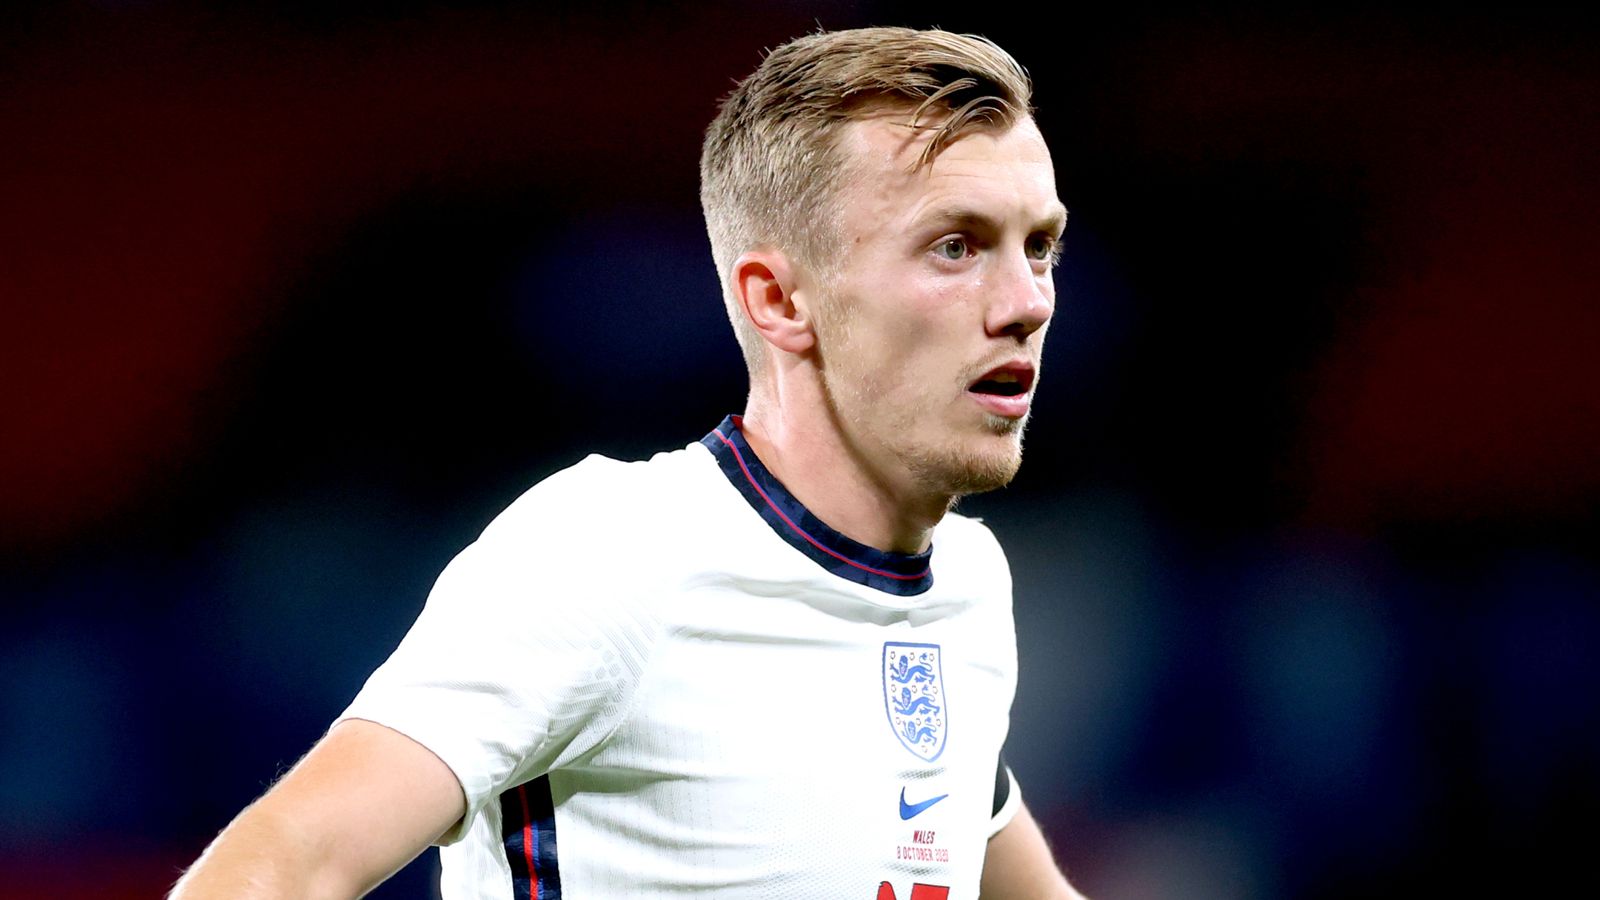 James Ward-Prowse replaces injured Kalvin Phillips in England squad for World Cup qualifiers